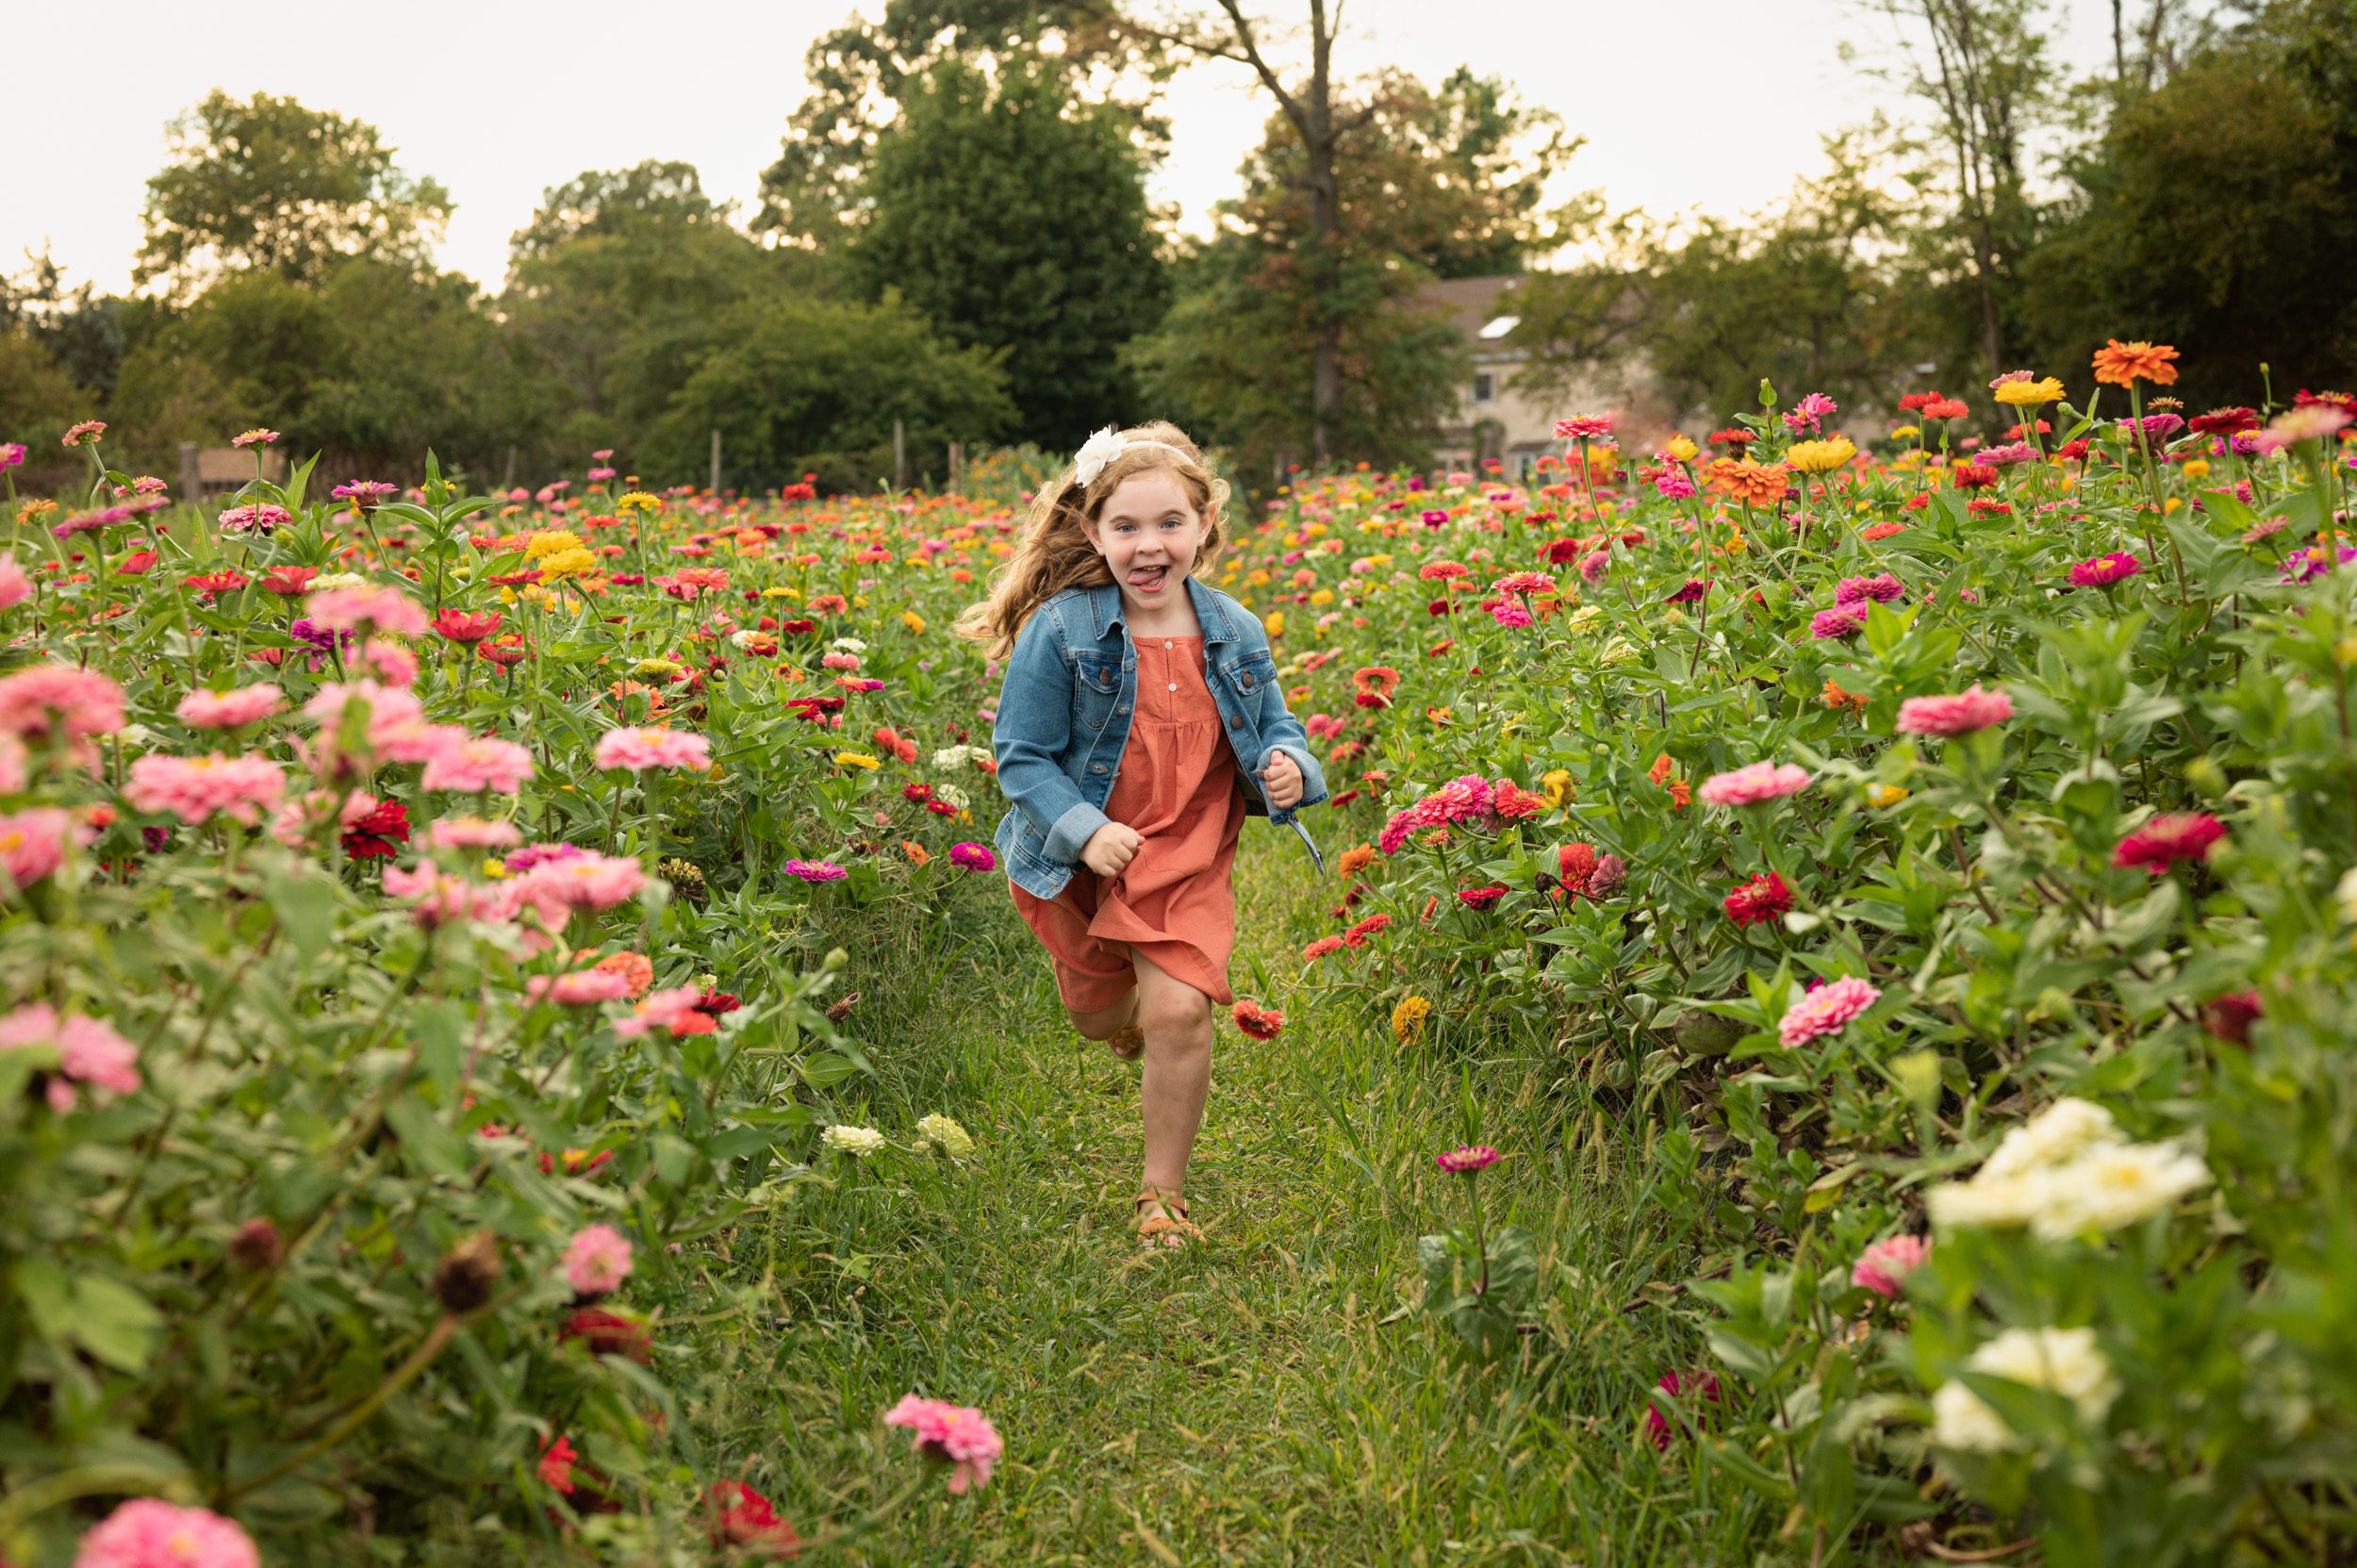 a young girl running through a field of colorful flowers and sticking her tongue out at the camera during a family photo session